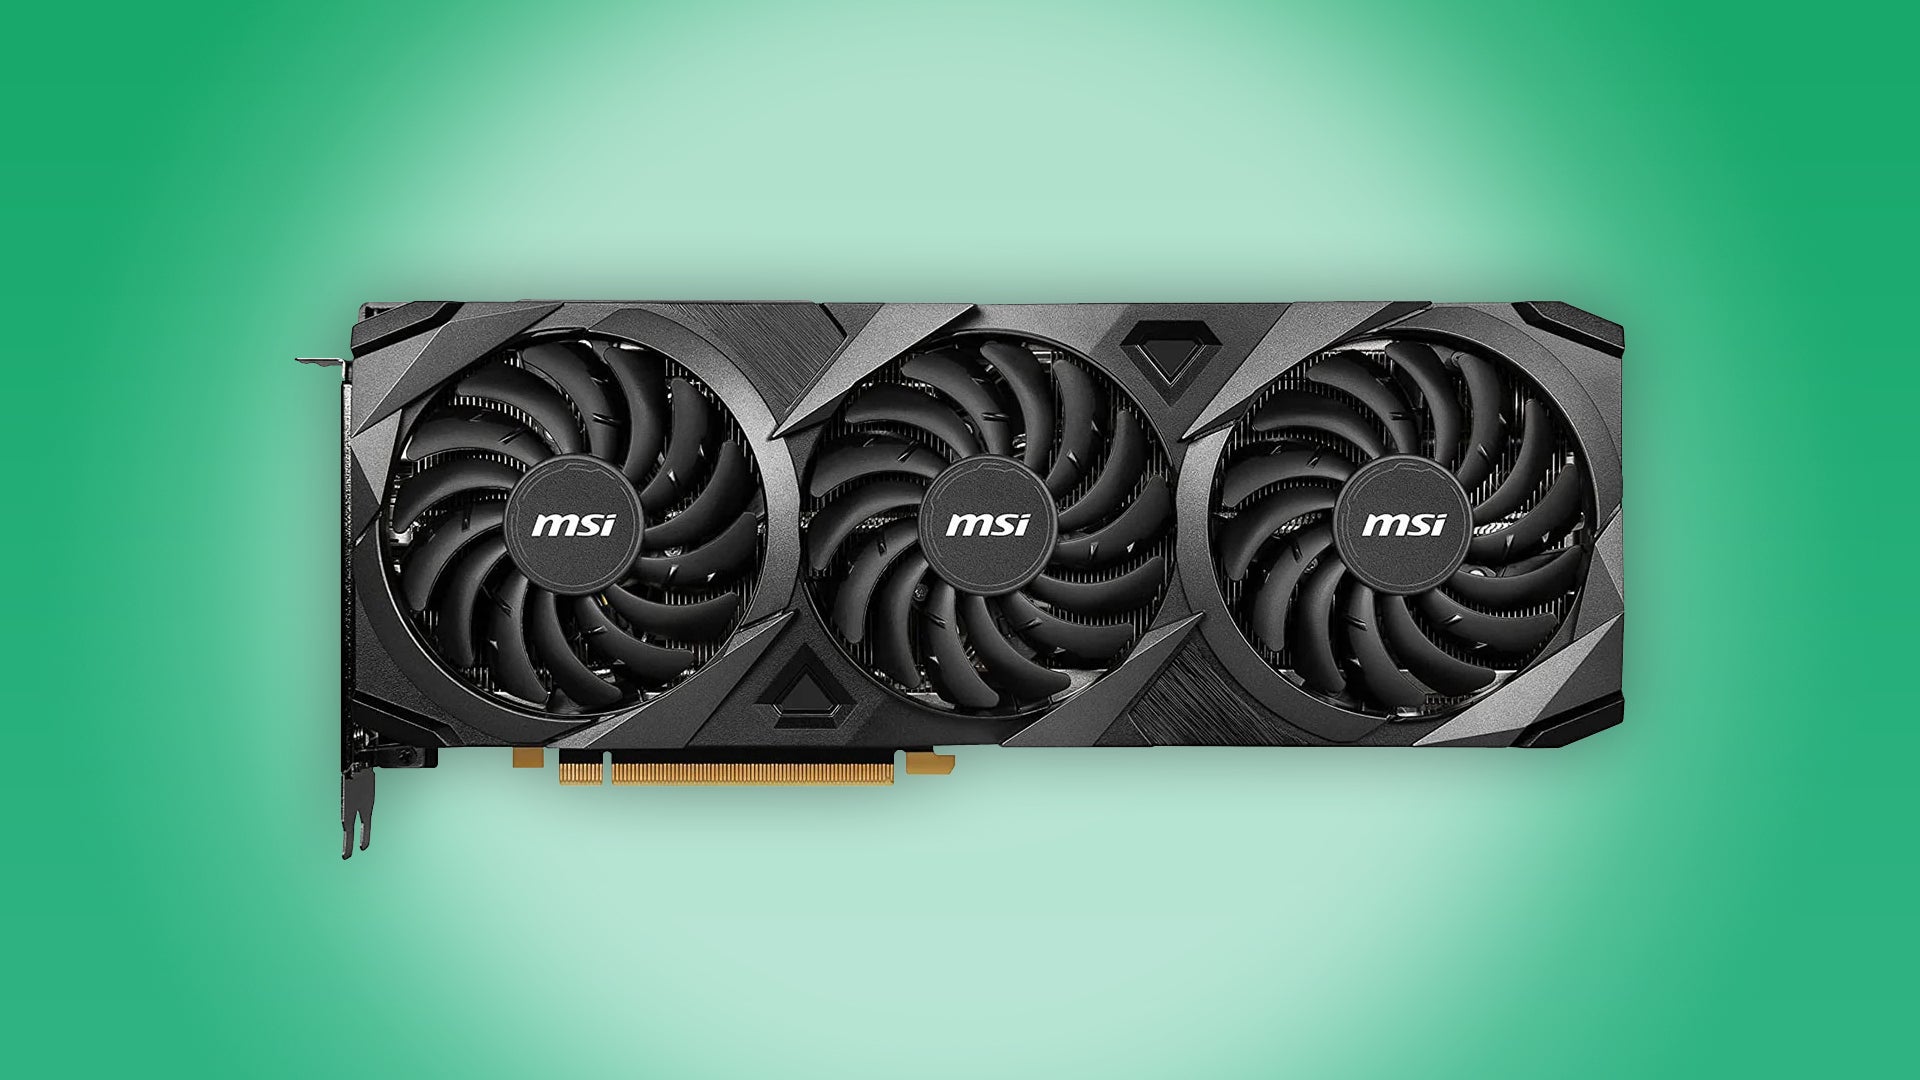 Image for This MSI Ventus RTX 3080 12GB graphics card is $810 at Newegg, after $480 discount